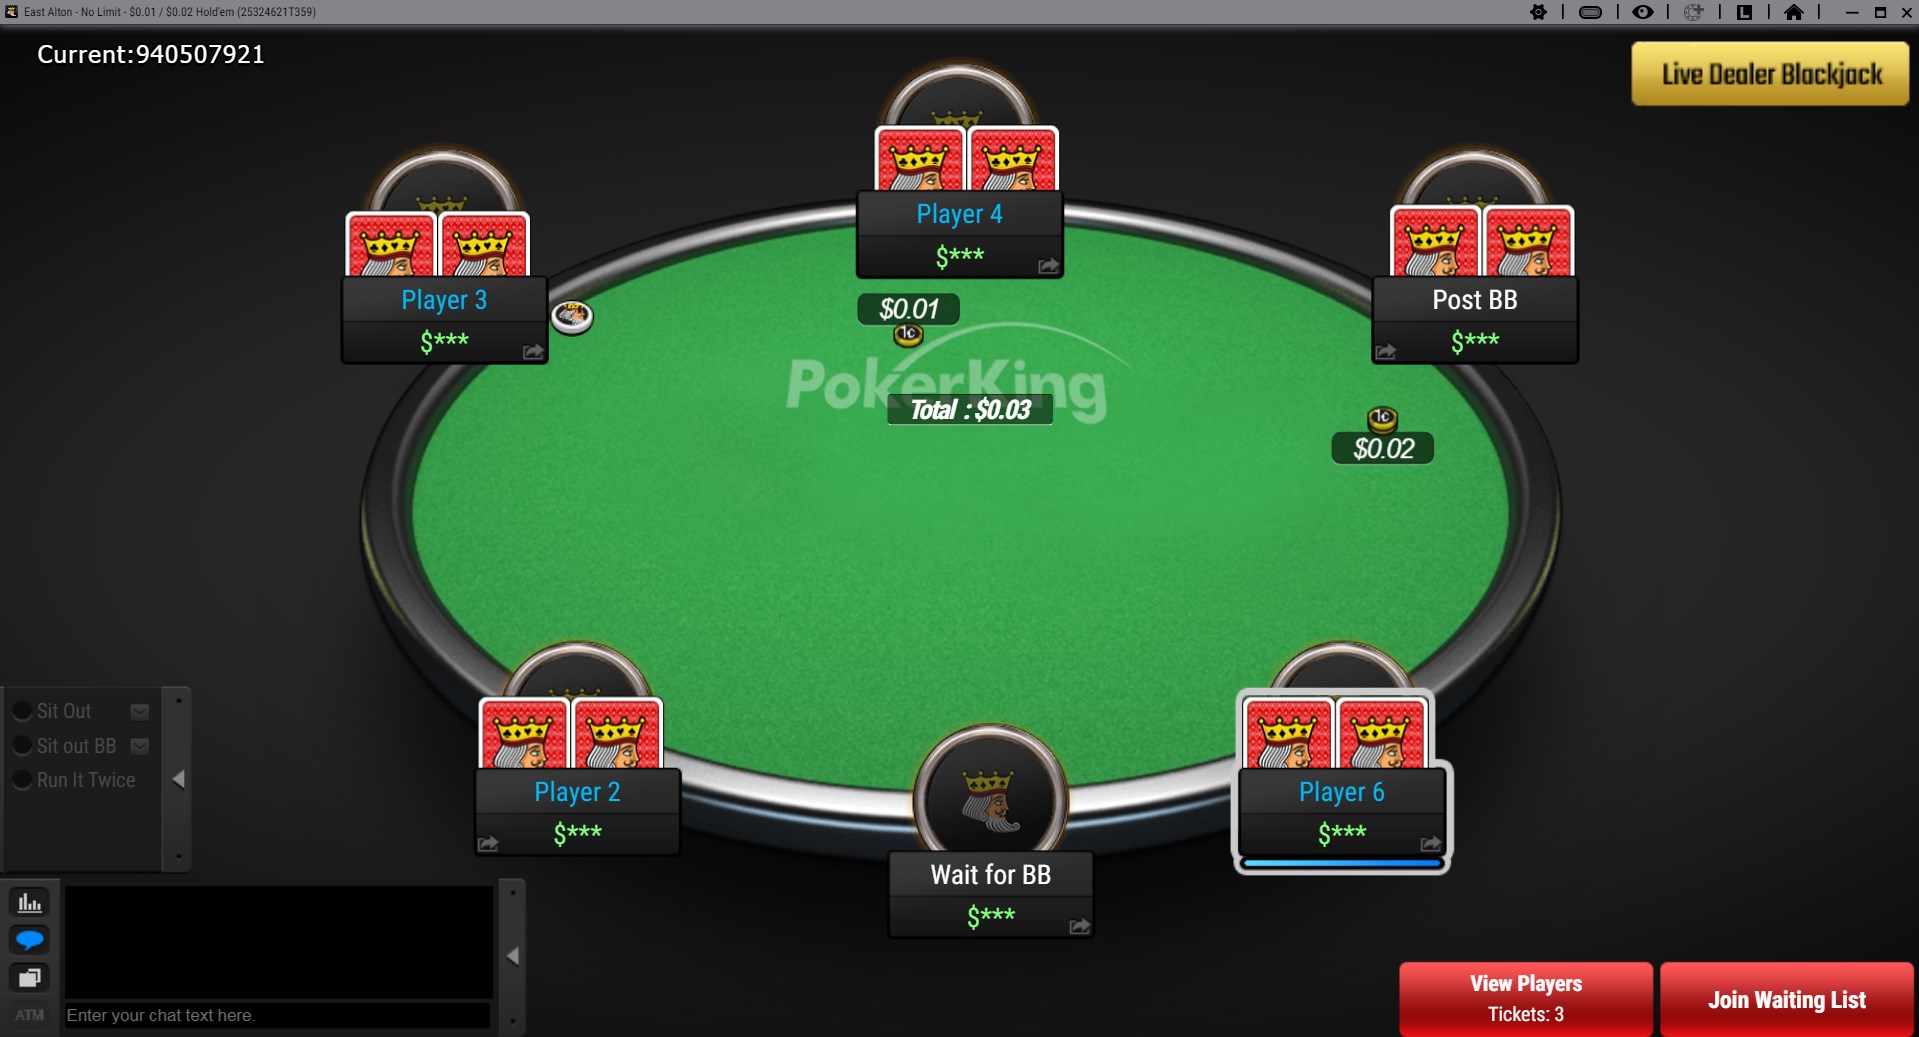 Blitz Poker at PokerKing is popular only at low limits.